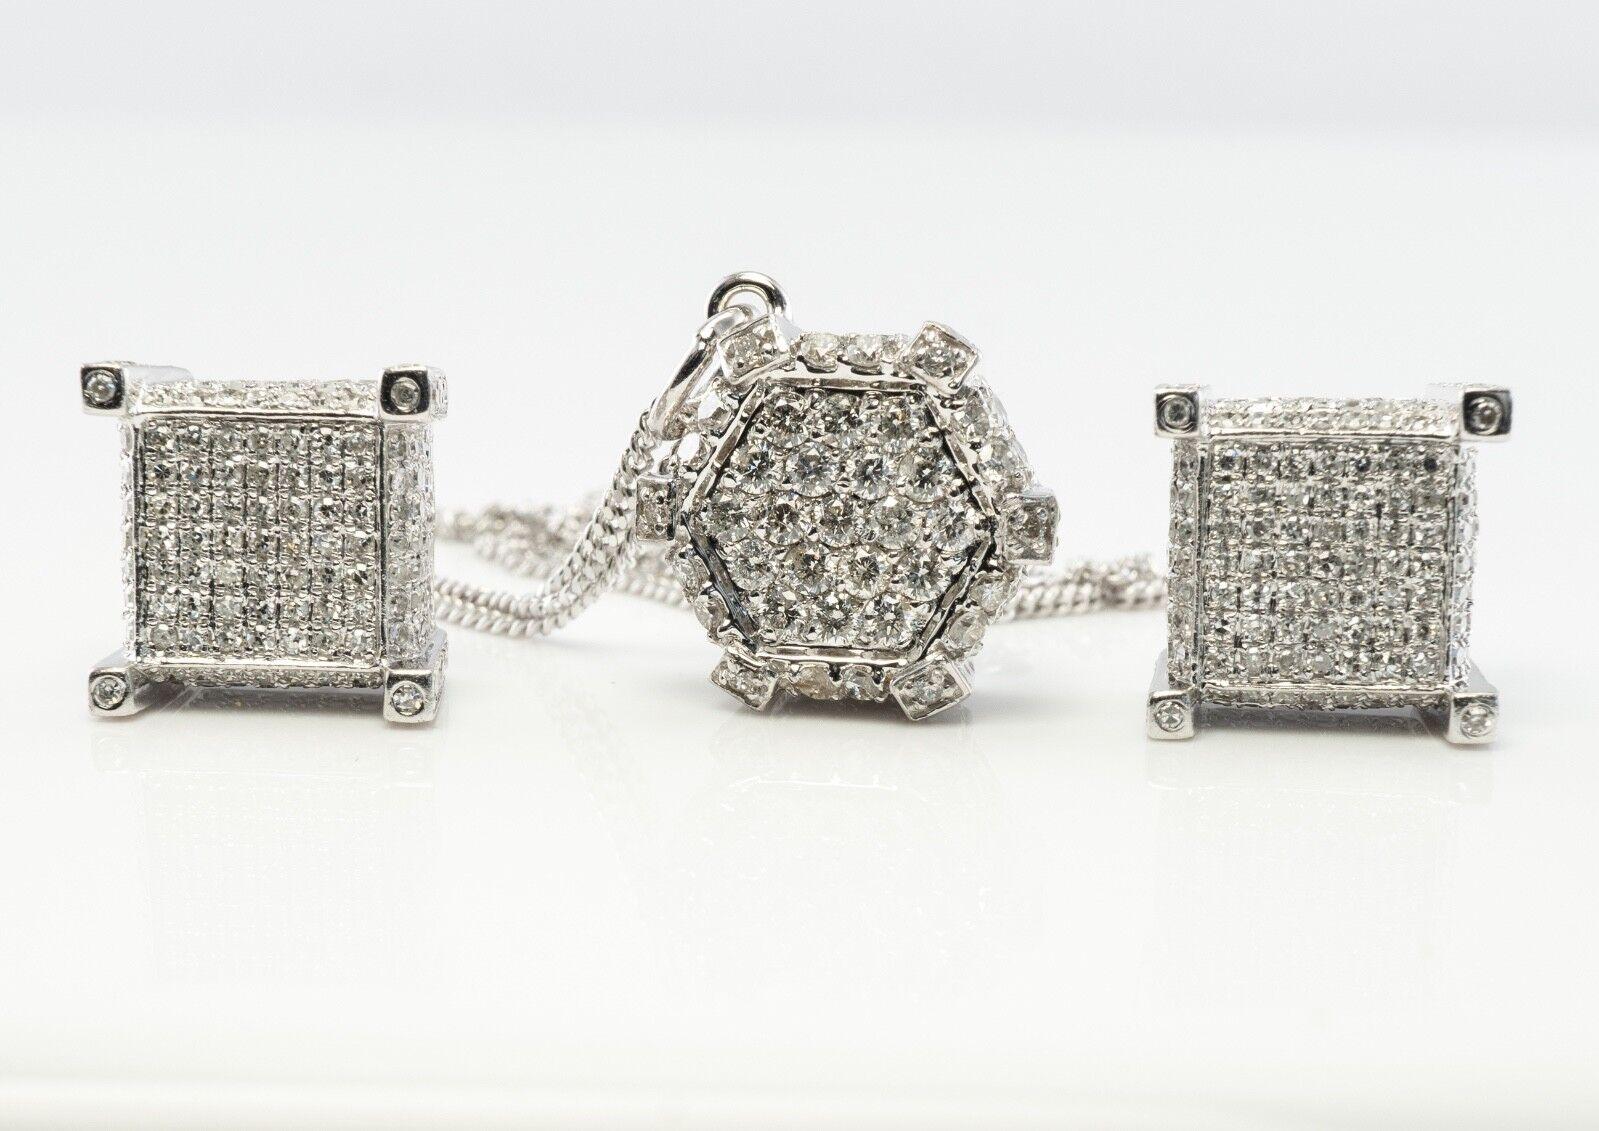 14K White Gold Diamond Earrings Diamond Pendant Diamond Necklace Set

This stunning diamond jewelry set is finely crafted in solid 14K White gold (stamped and tested) and set with white and fiery diamonds. 
The earrings are studded with 237 diamonds